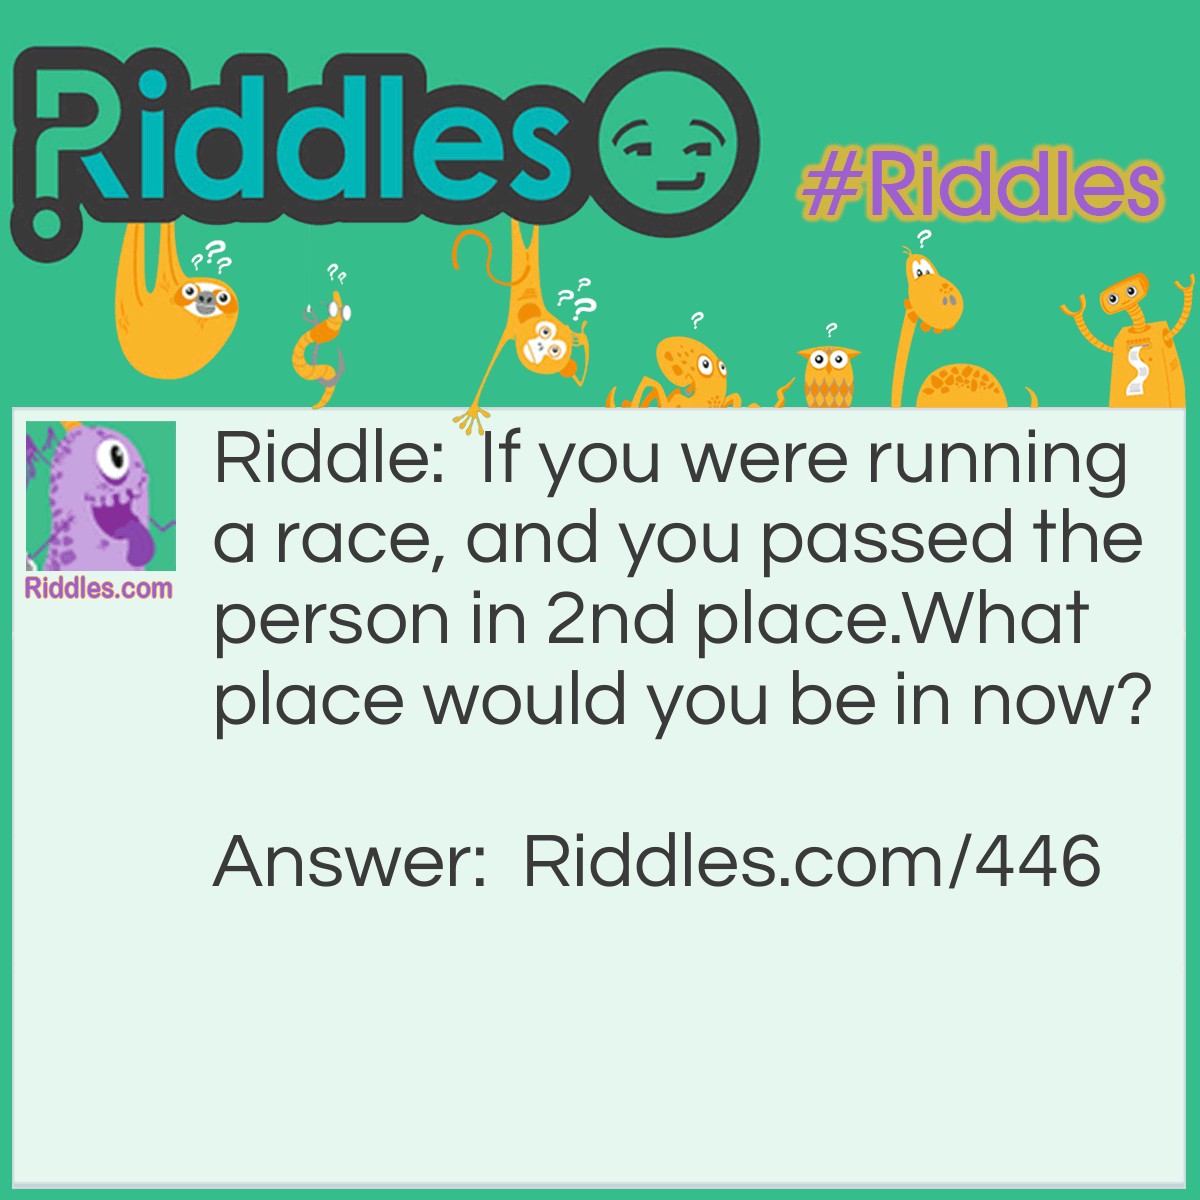 Riddle: If you were running a race, and you passed the person in 2nd place.
What place would you be in now? Answer: You would be in 2nd, not 1st.